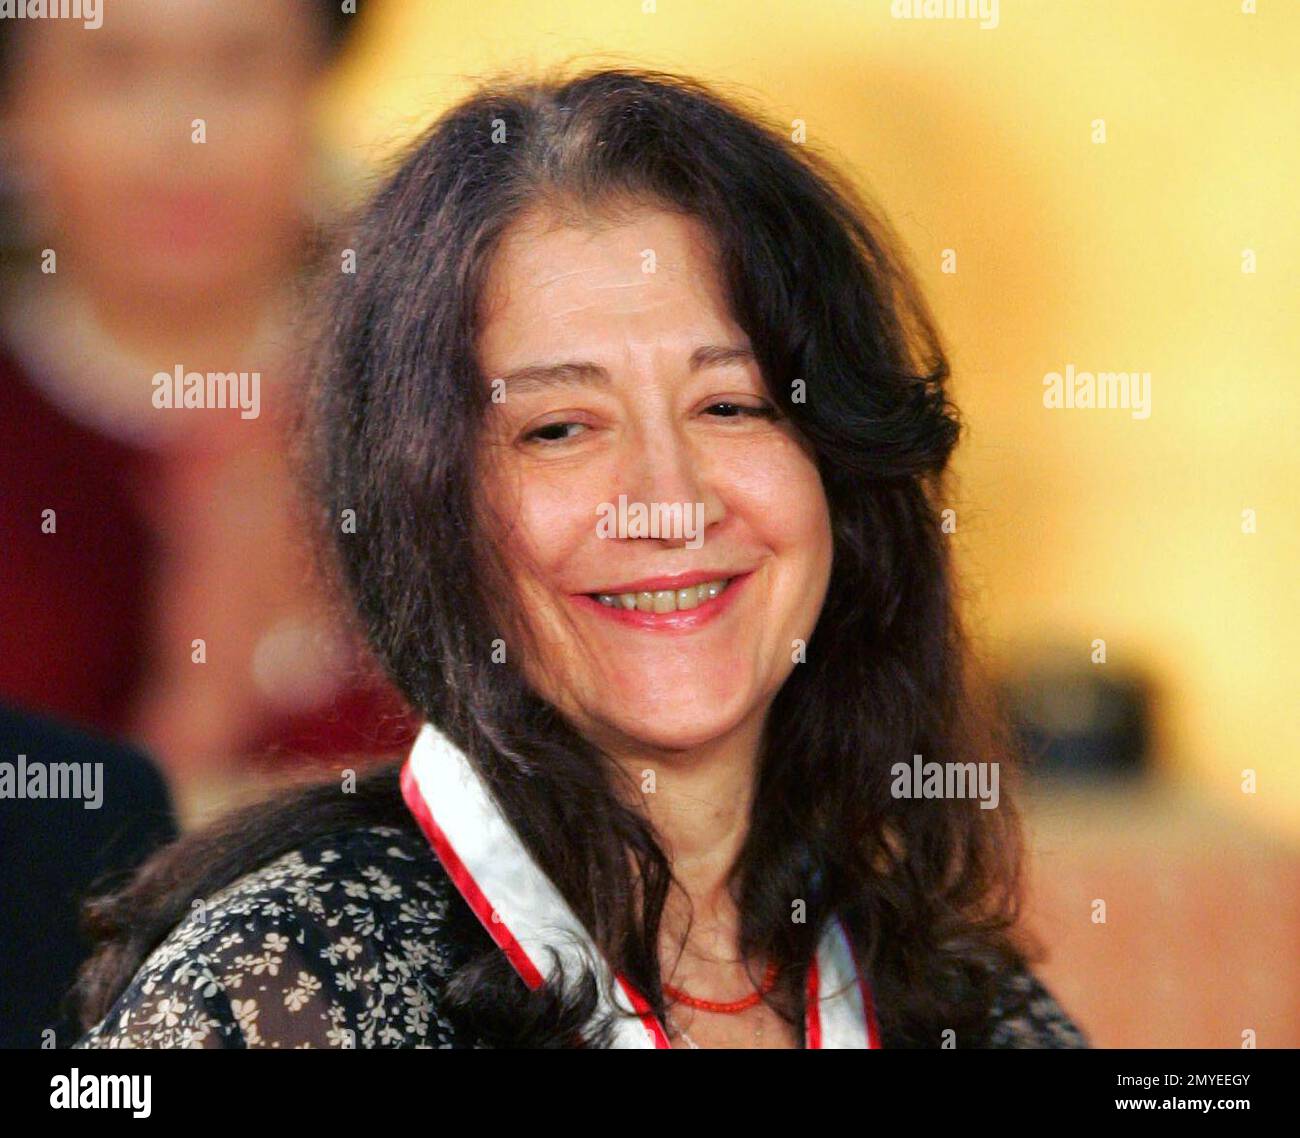 FILE - In this Oct. 18 2005 file photo, Argentine pianist Martha Argerich is seen in Tokyo. This year’s Kennedy Center honorees include musicians who span genres including pop, rock, gospel, blues, folk and classical _ and an actor known for his extraordinary range. The John F. Kennedy Center for the Performing Arts announced Thursday, June 23, 2016, that actor Al Pacino, rock band the Eagles, Argentine pianist Martha Argerich, gospel and blues singer Mavis Staples and singer-songwriter James Taylor will be honored for influencing American culture through the arts. (AP Photo/Shizuo Kambayashi, Banque D'Images